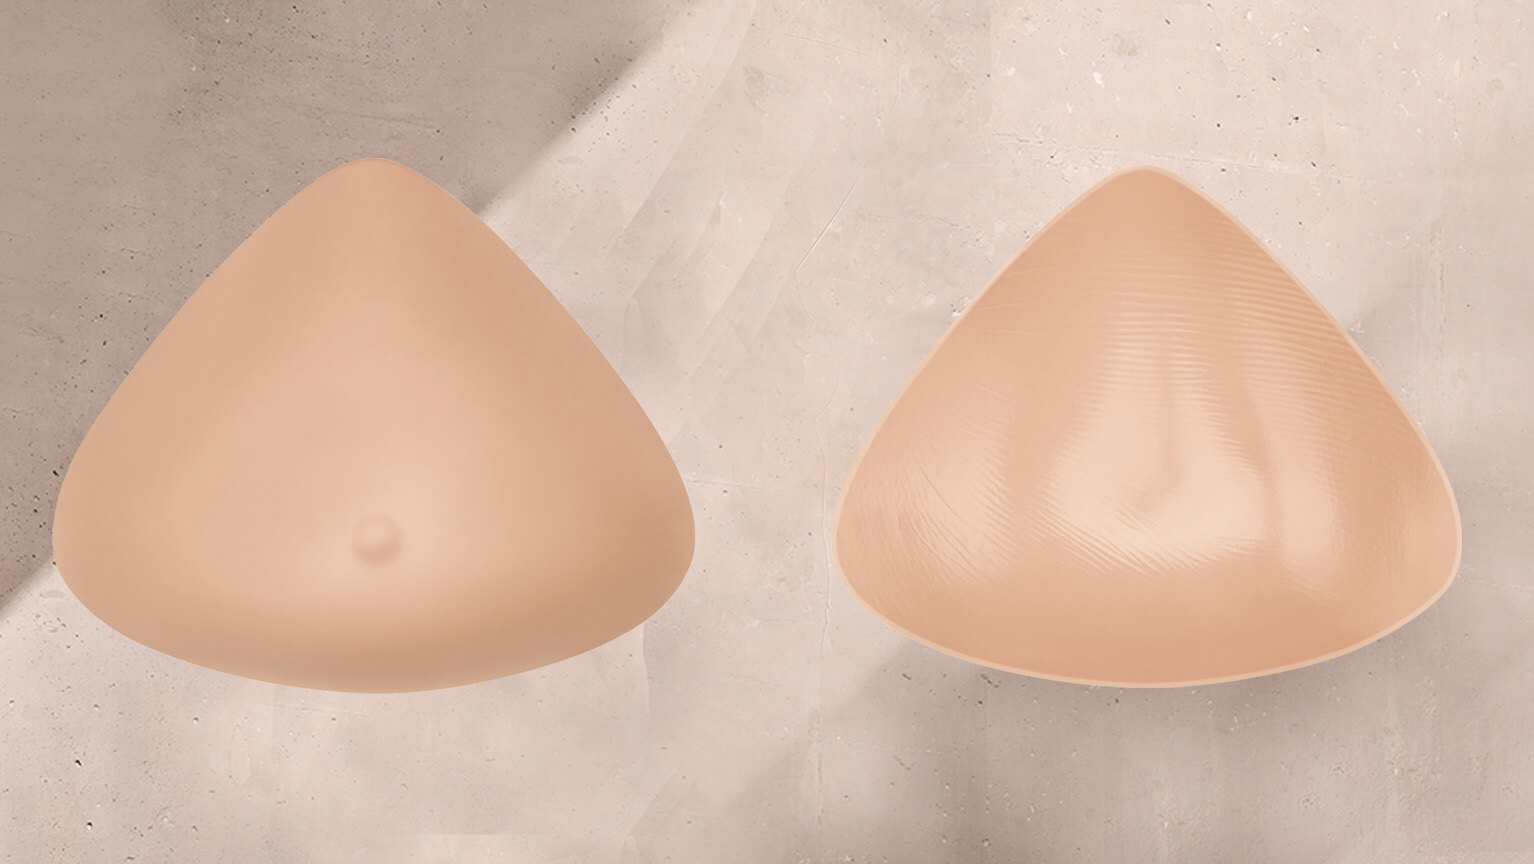 Essential Breast Forms  Comfortable Everyday Breast Forms and Bra Inserts  - Amoena US